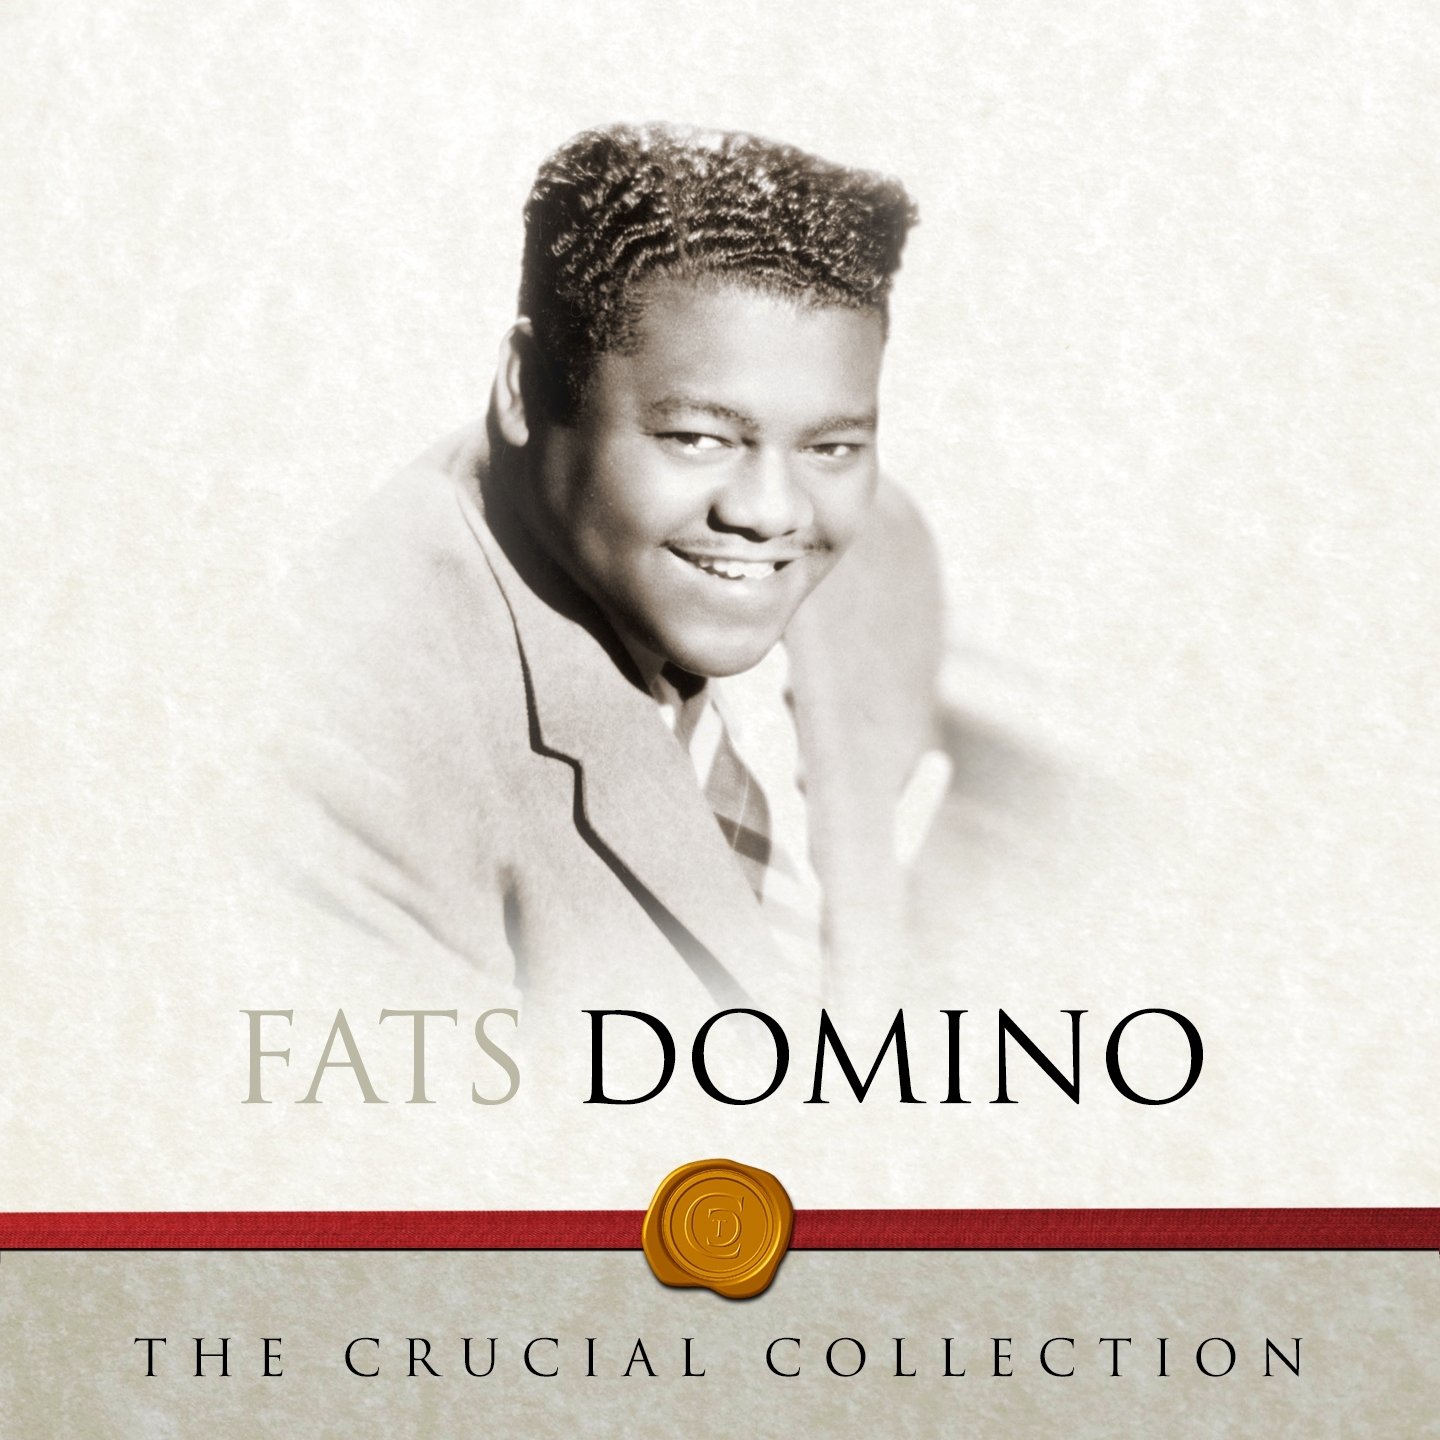 Fats Domino - The Fats Domino Collection (1993) [FLAC] Download